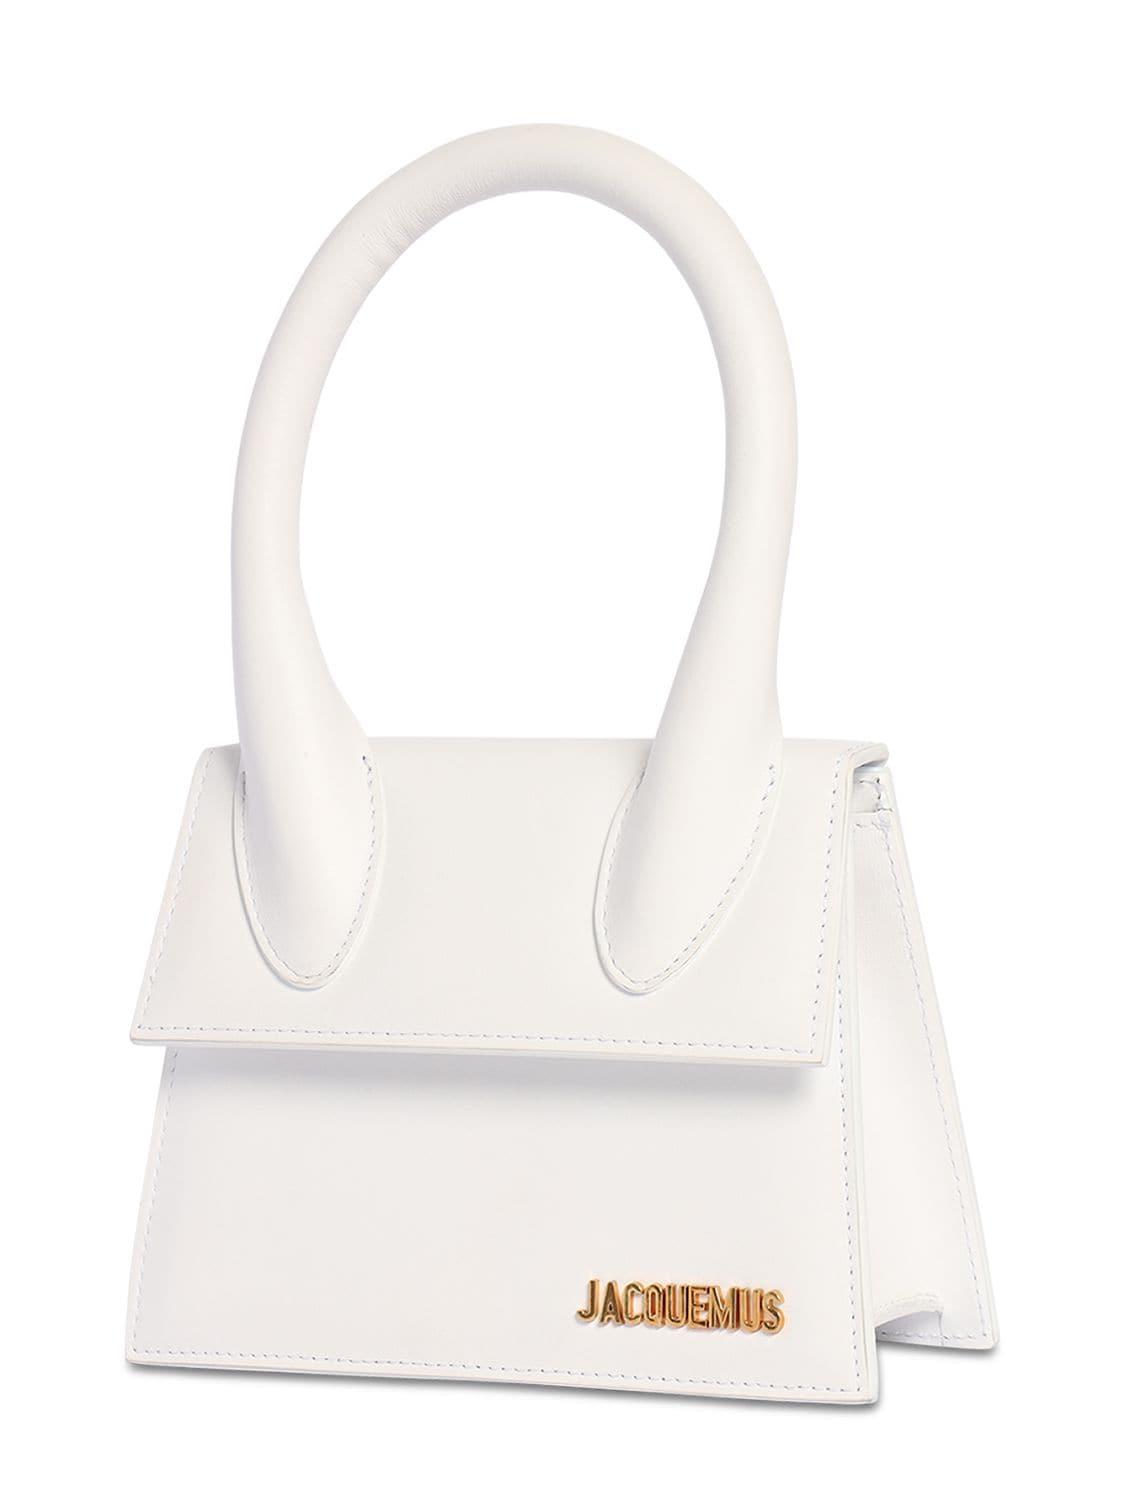 Jacquemus Le Chiquito Moyen Leather Bag in White - Lyst